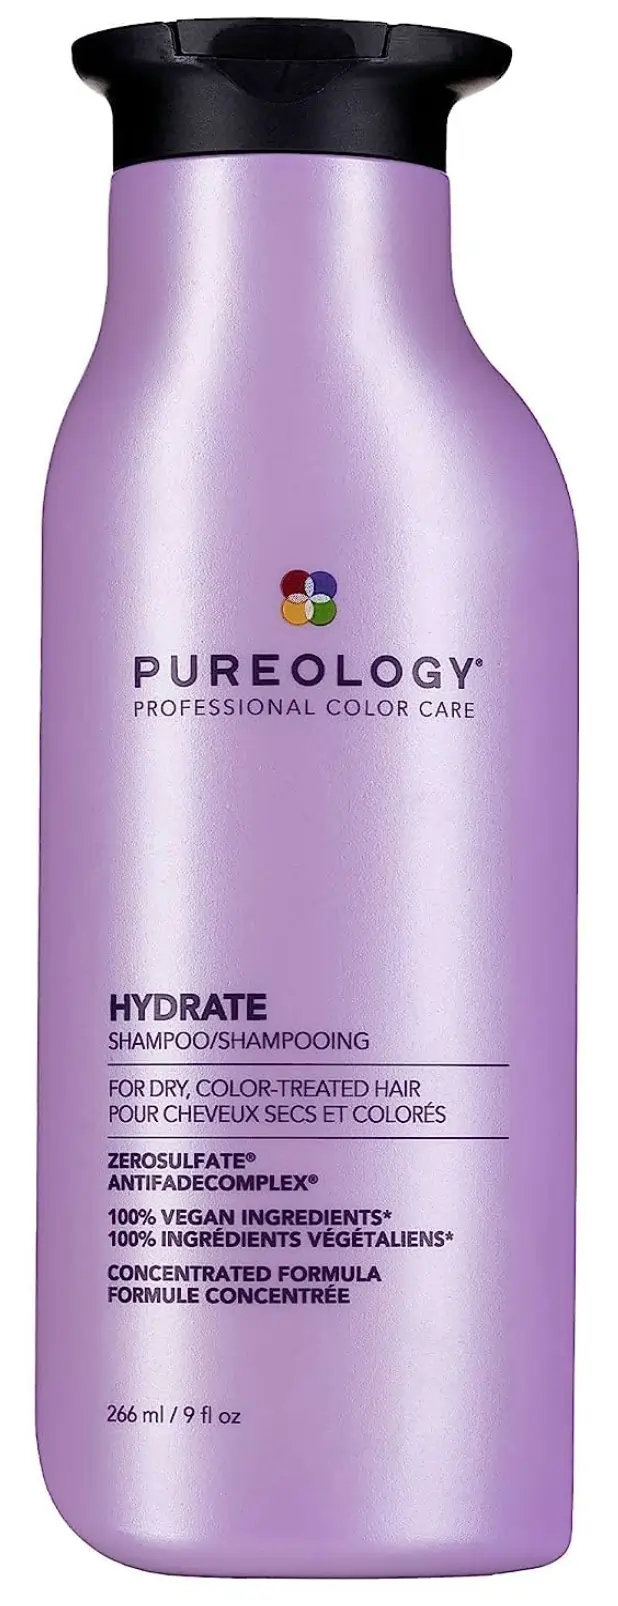 A tied FEMMENORDIC's choice in the Pureology vs Colorproof comparison, the Pureology Hydrate.